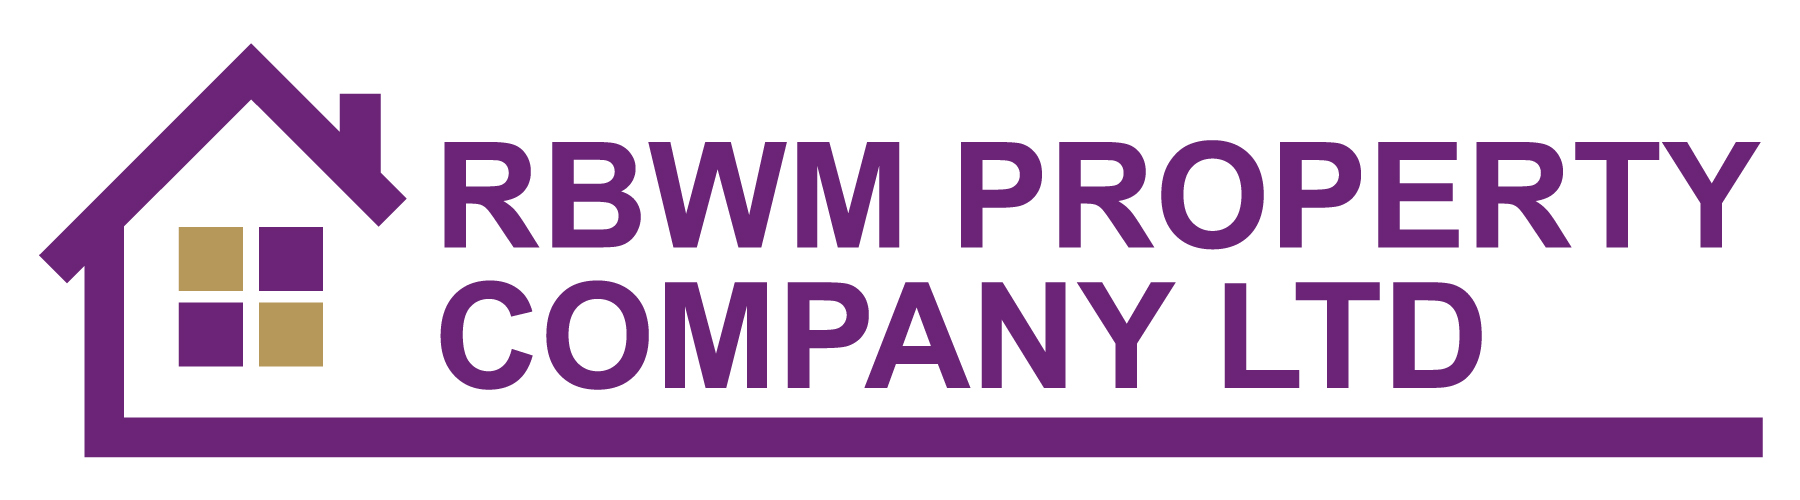 RBWM Property Company Limited image